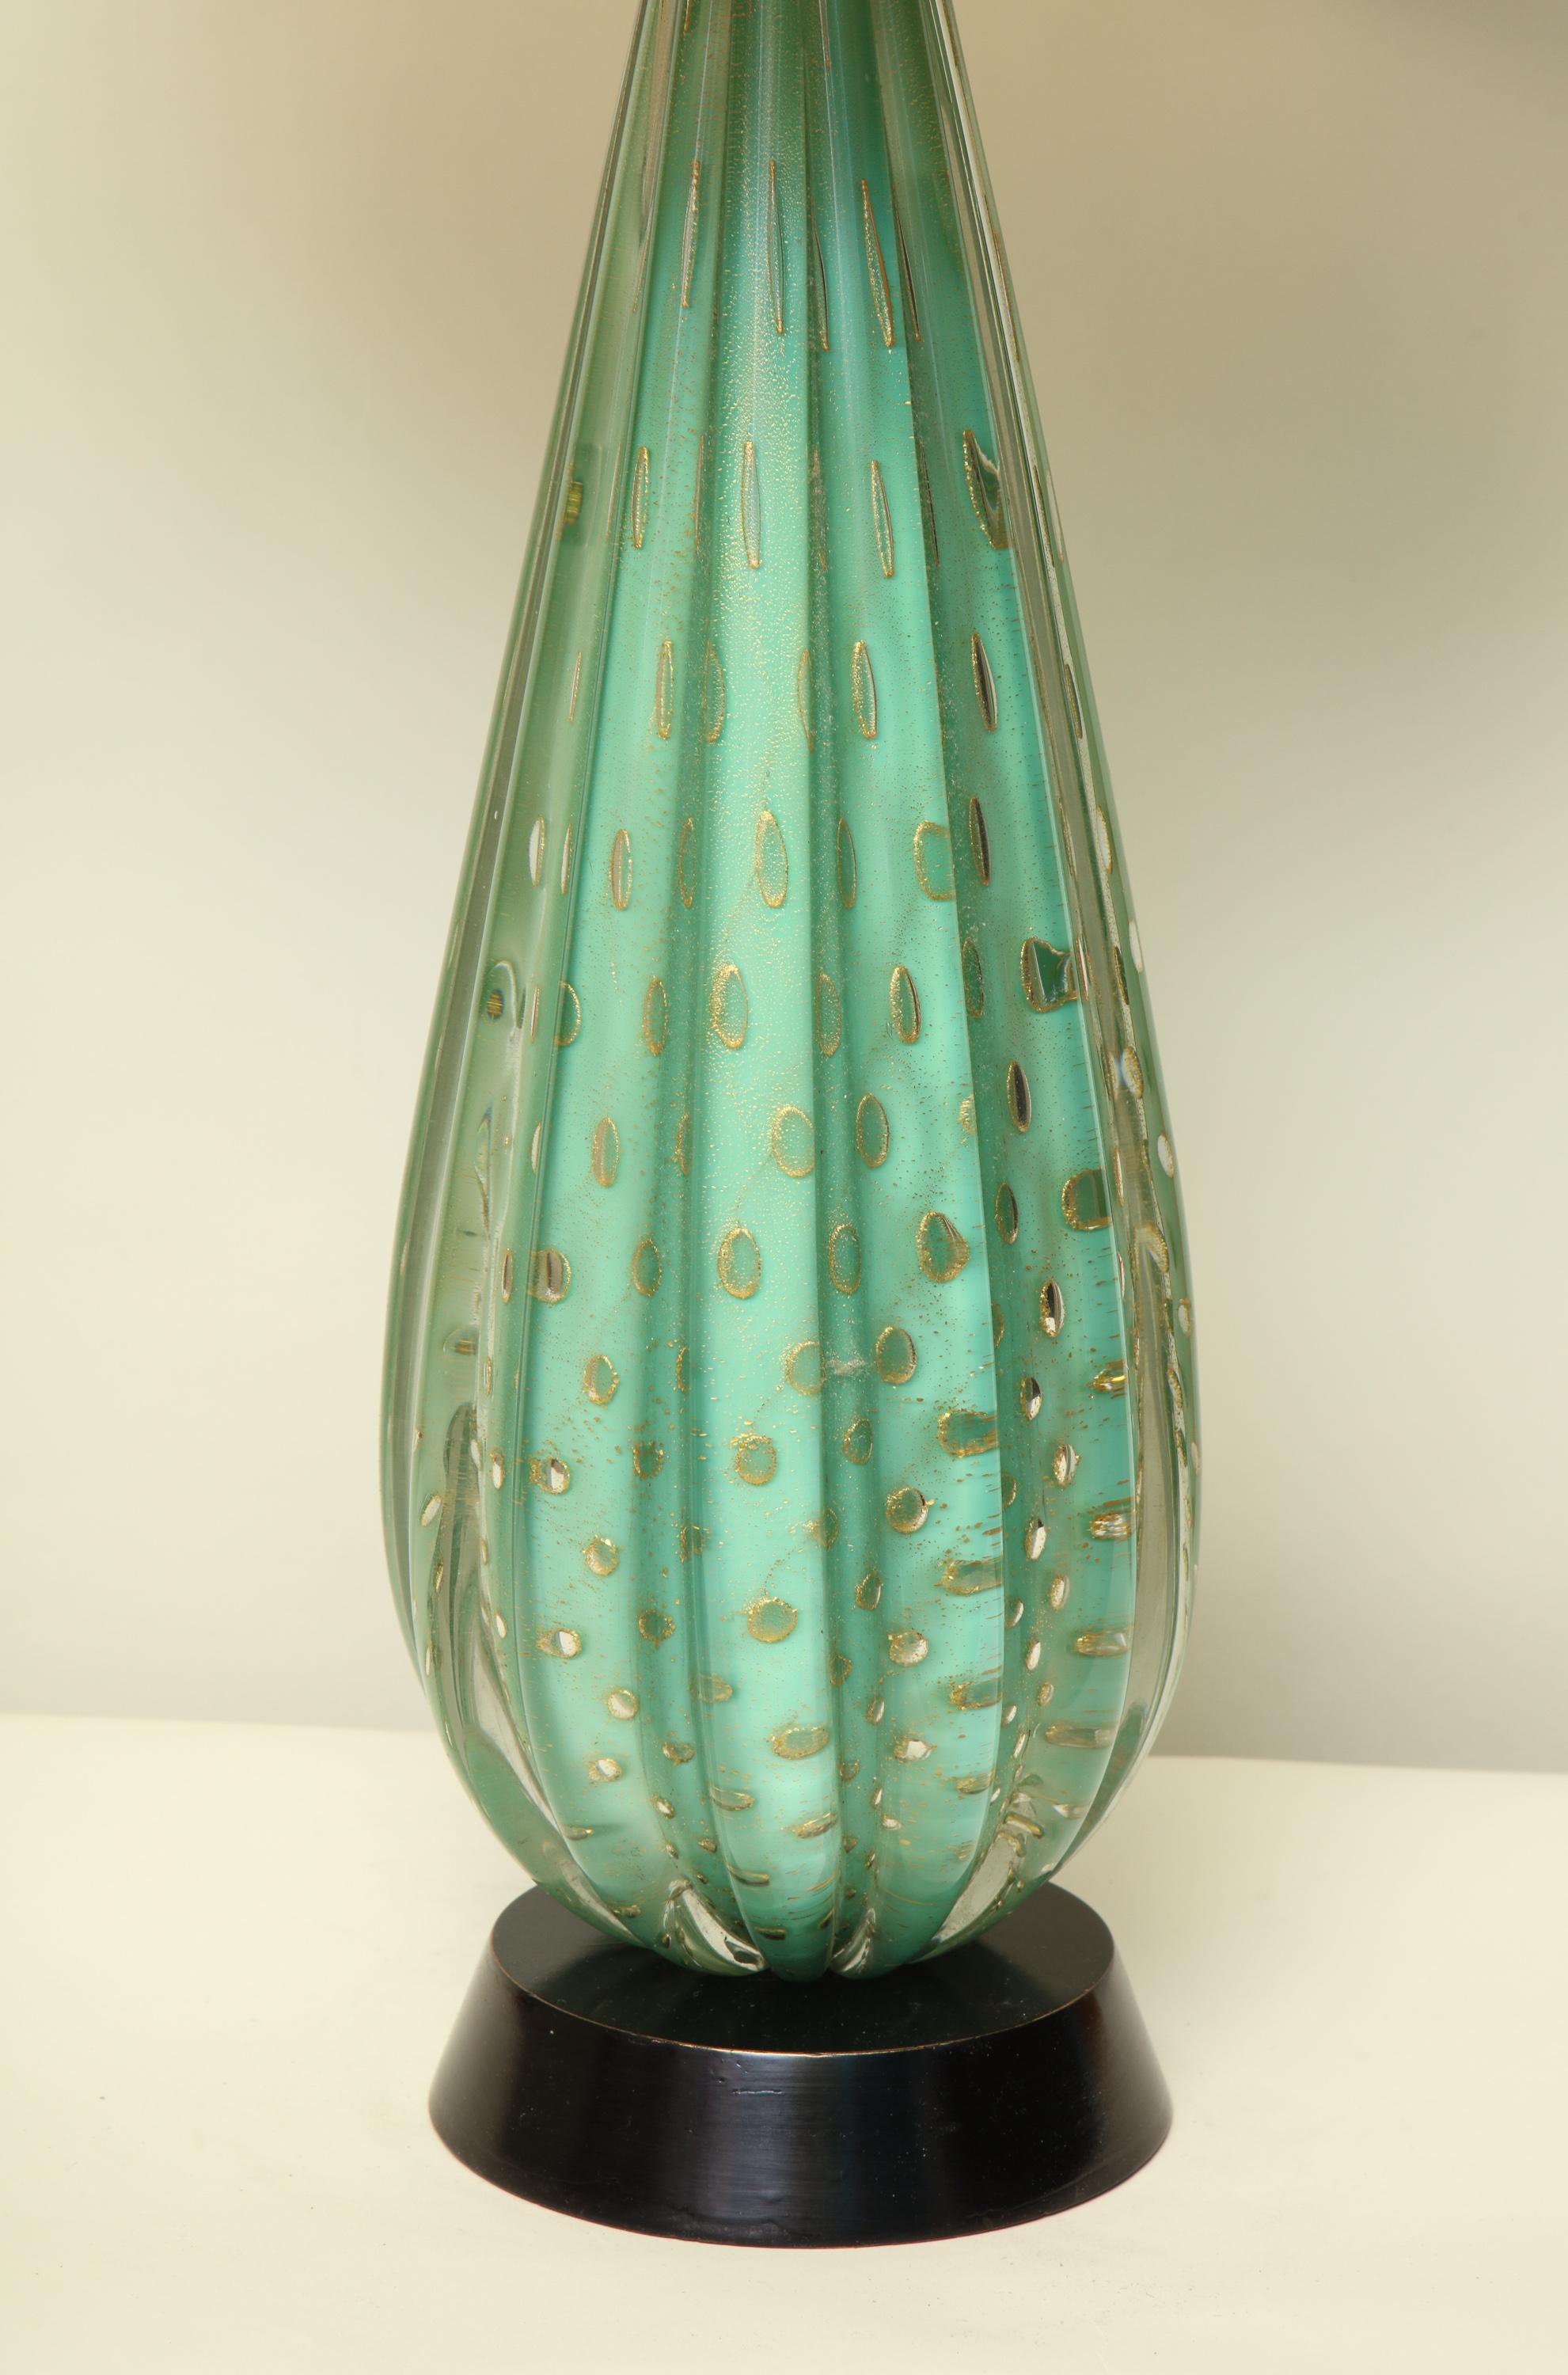 A Seguso table lamp Murano art glass green with gold inclusions black lacquer base new 3-way socket and rewired.
Shade not included.